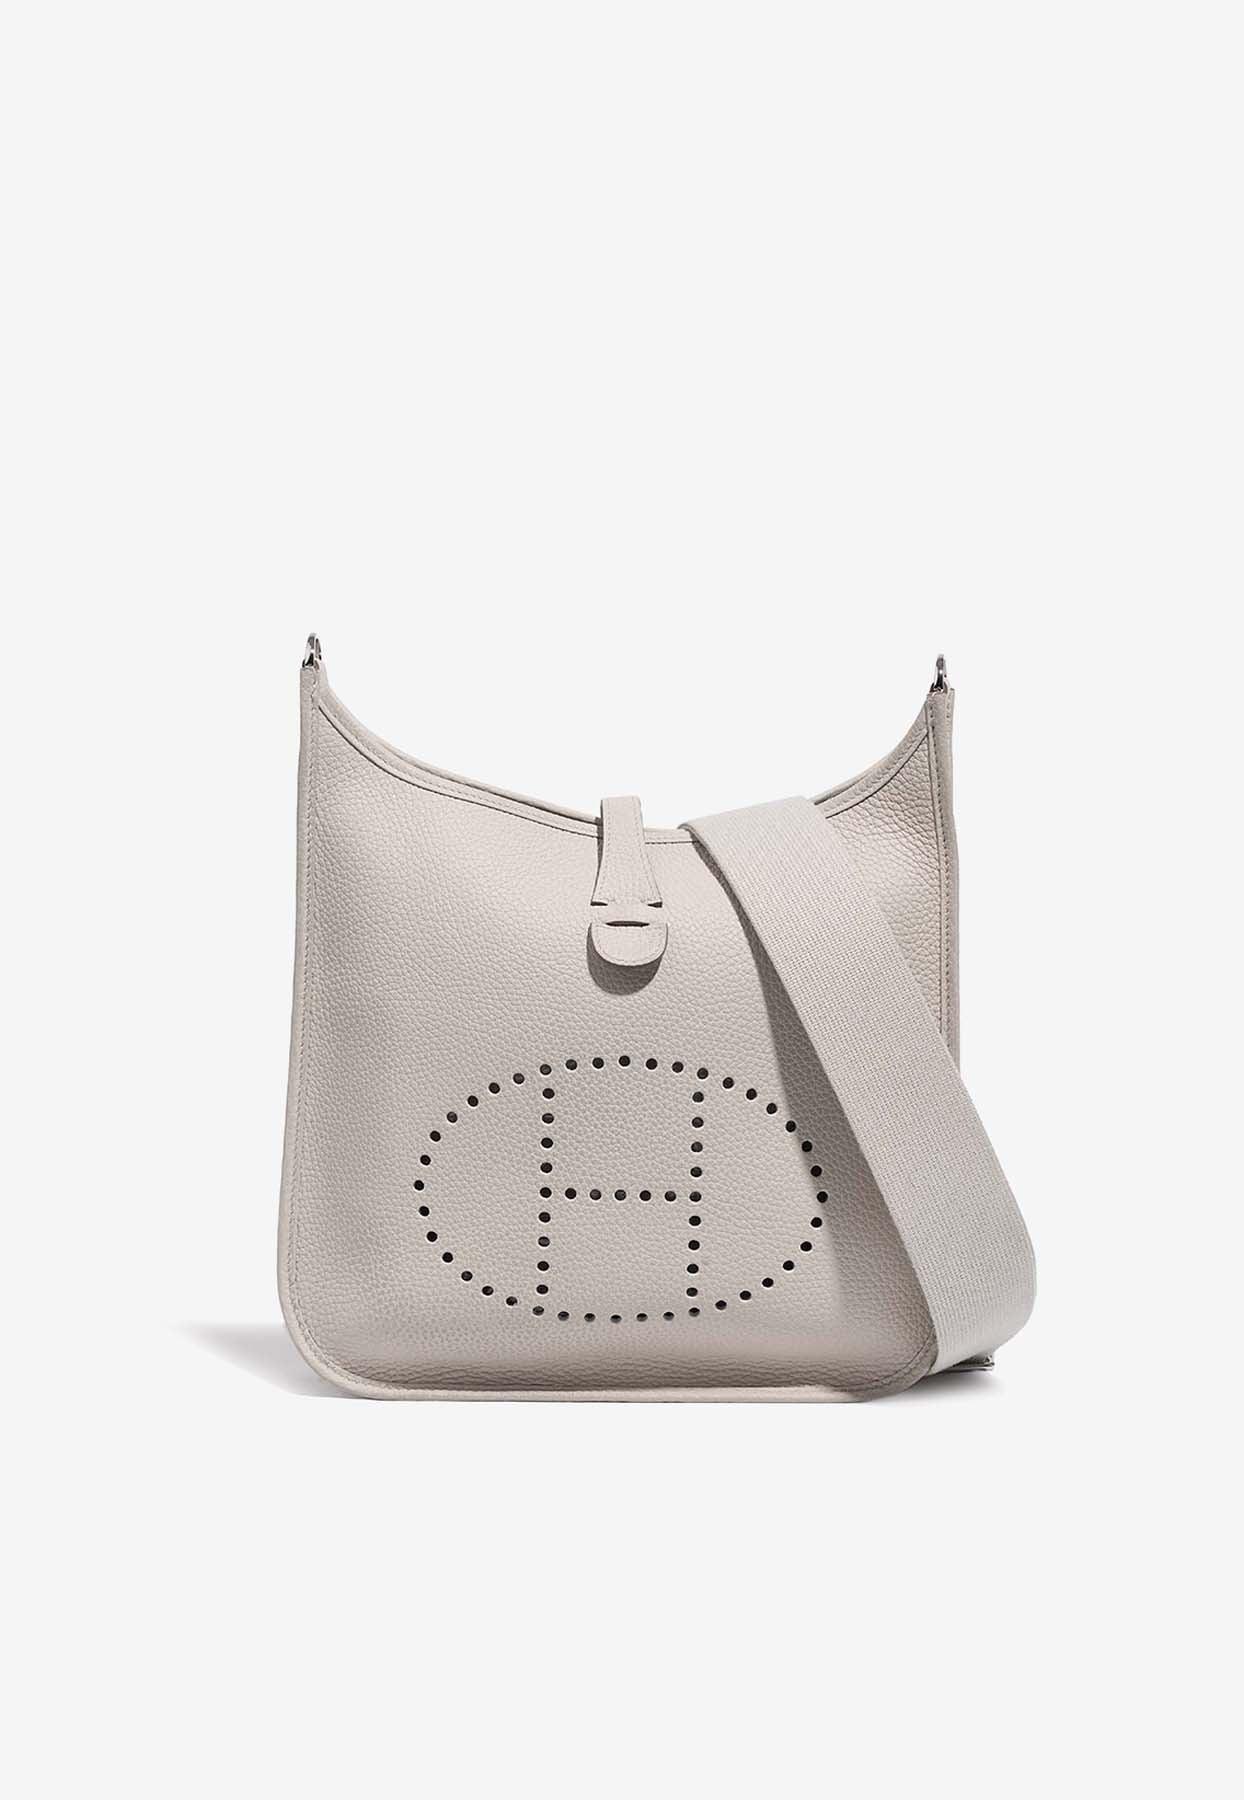 Hermès Evelyne Iii 29 In Beton Taurillon Clemence With Palladium Hardware  in Natural | Lyst